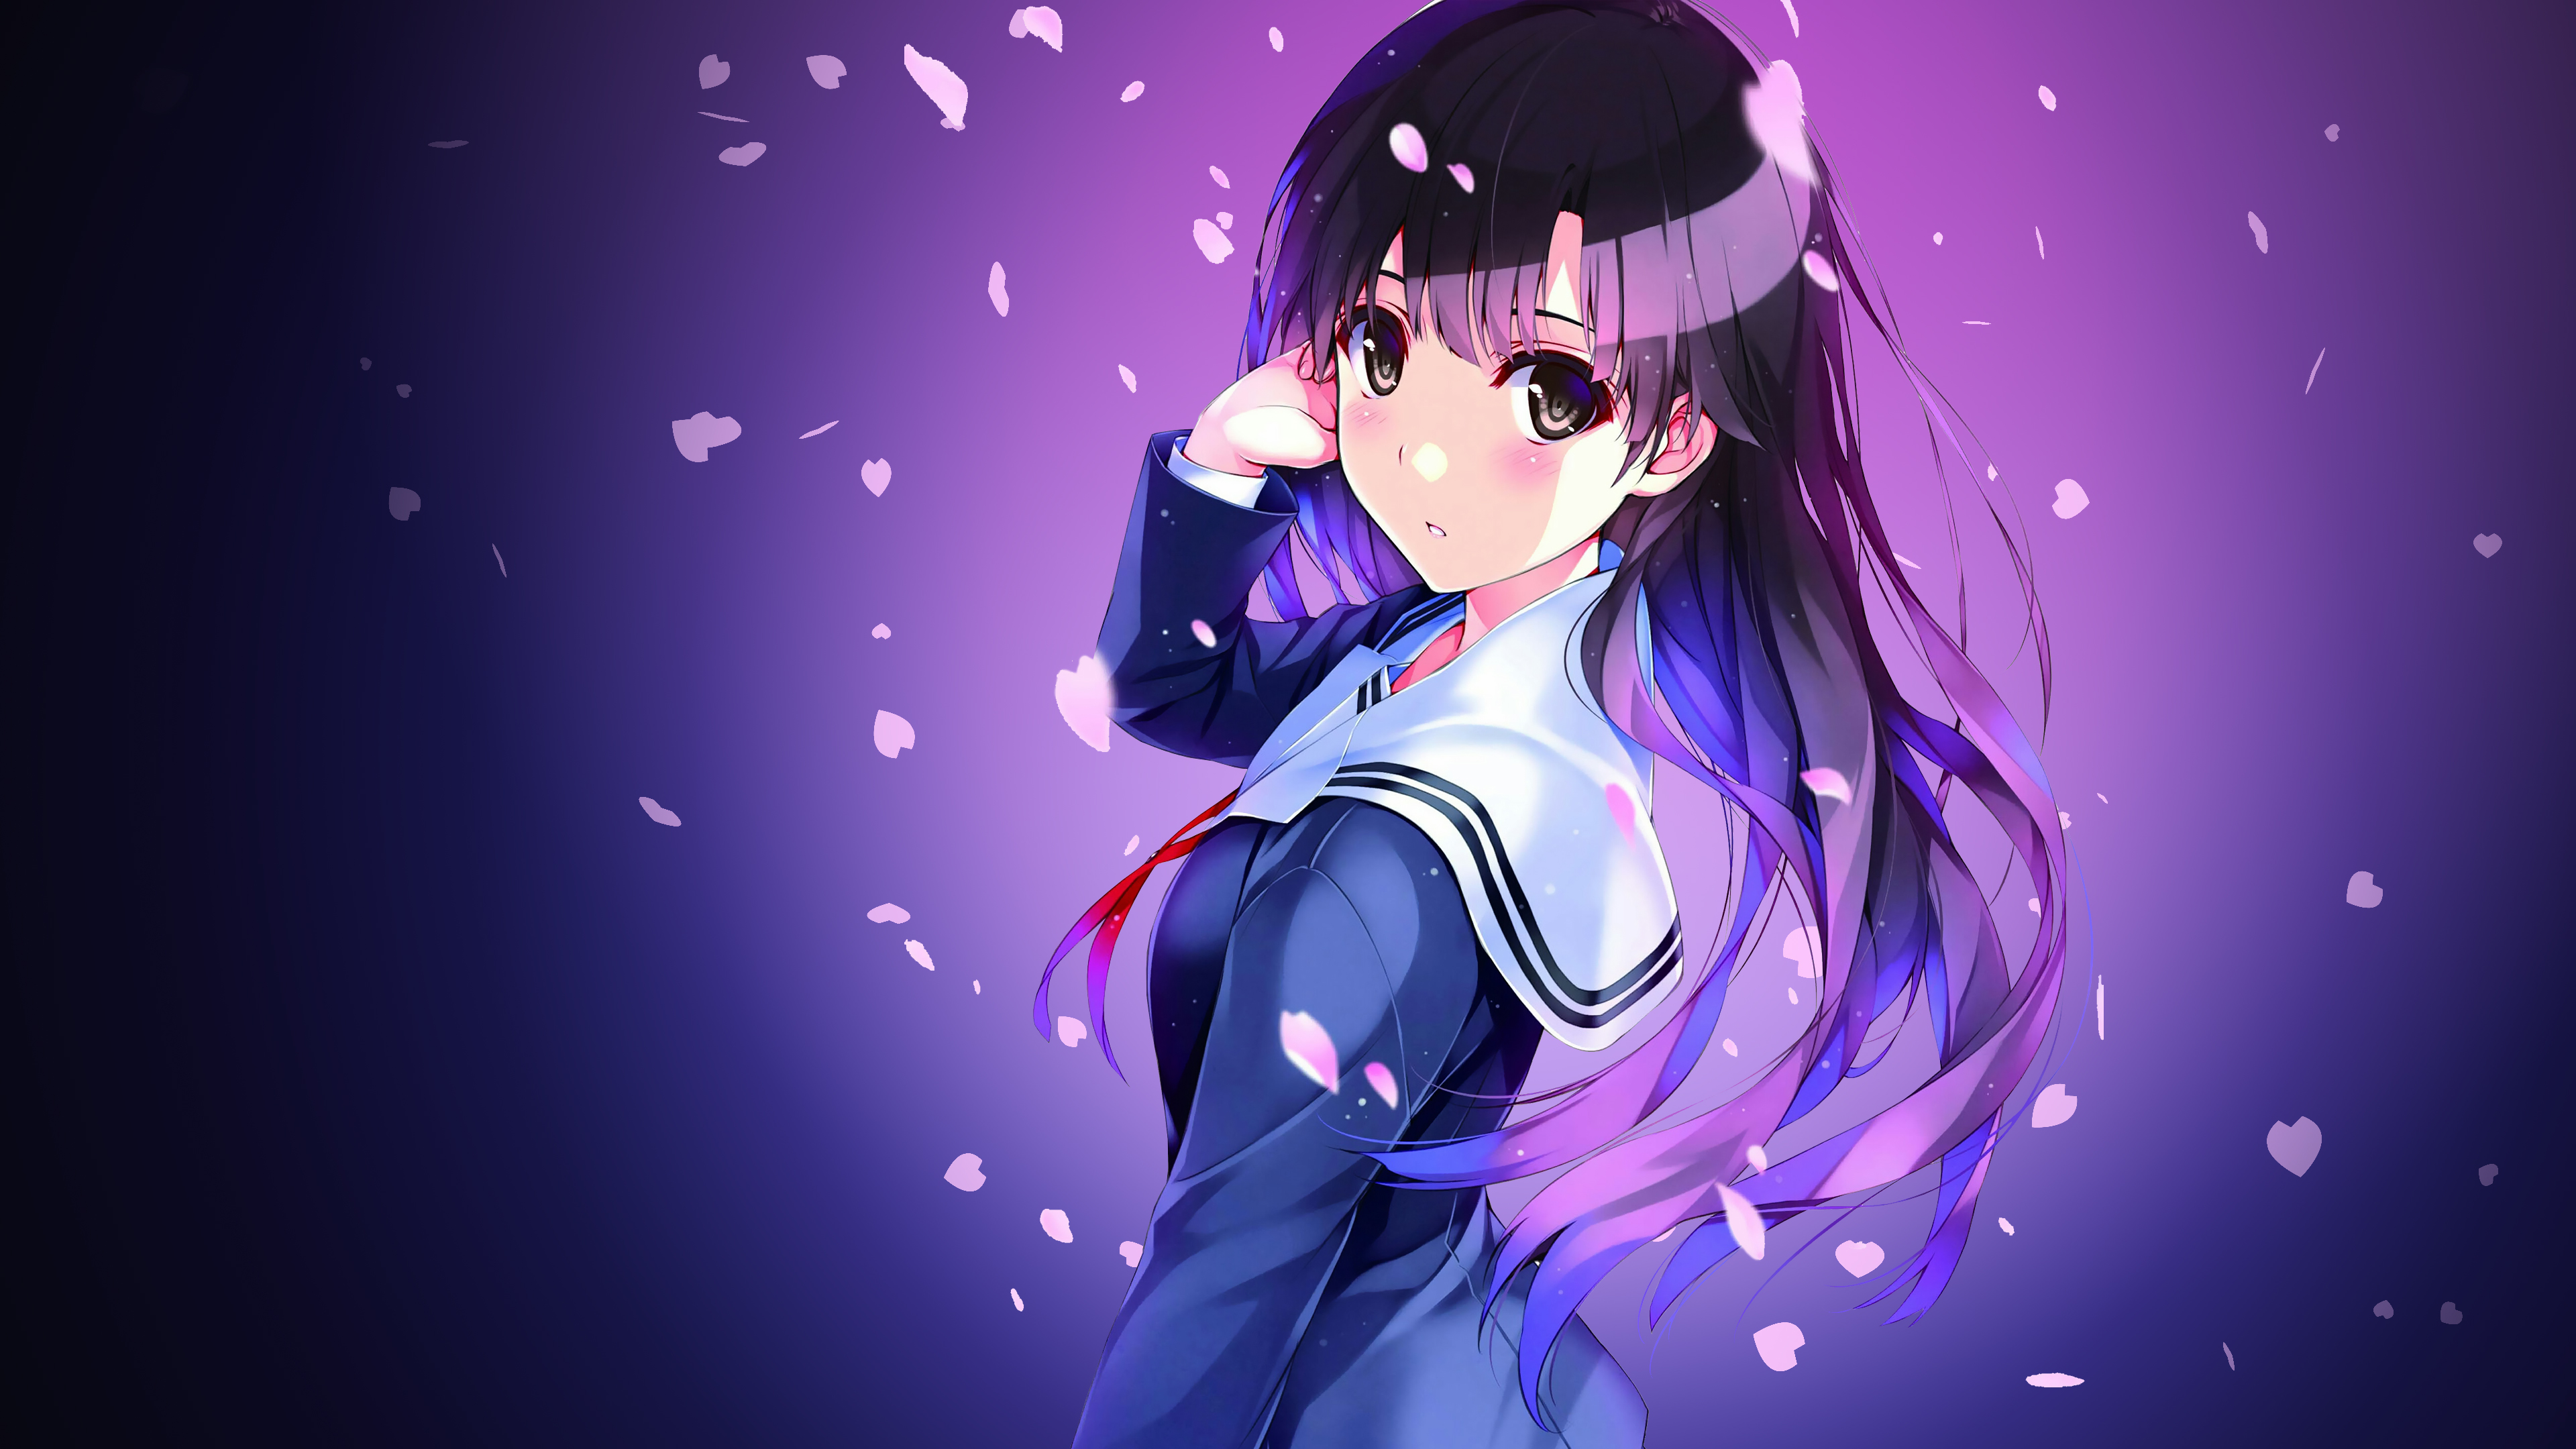 Nightcore Anime HD Wallpapers - Wallpaper Cave